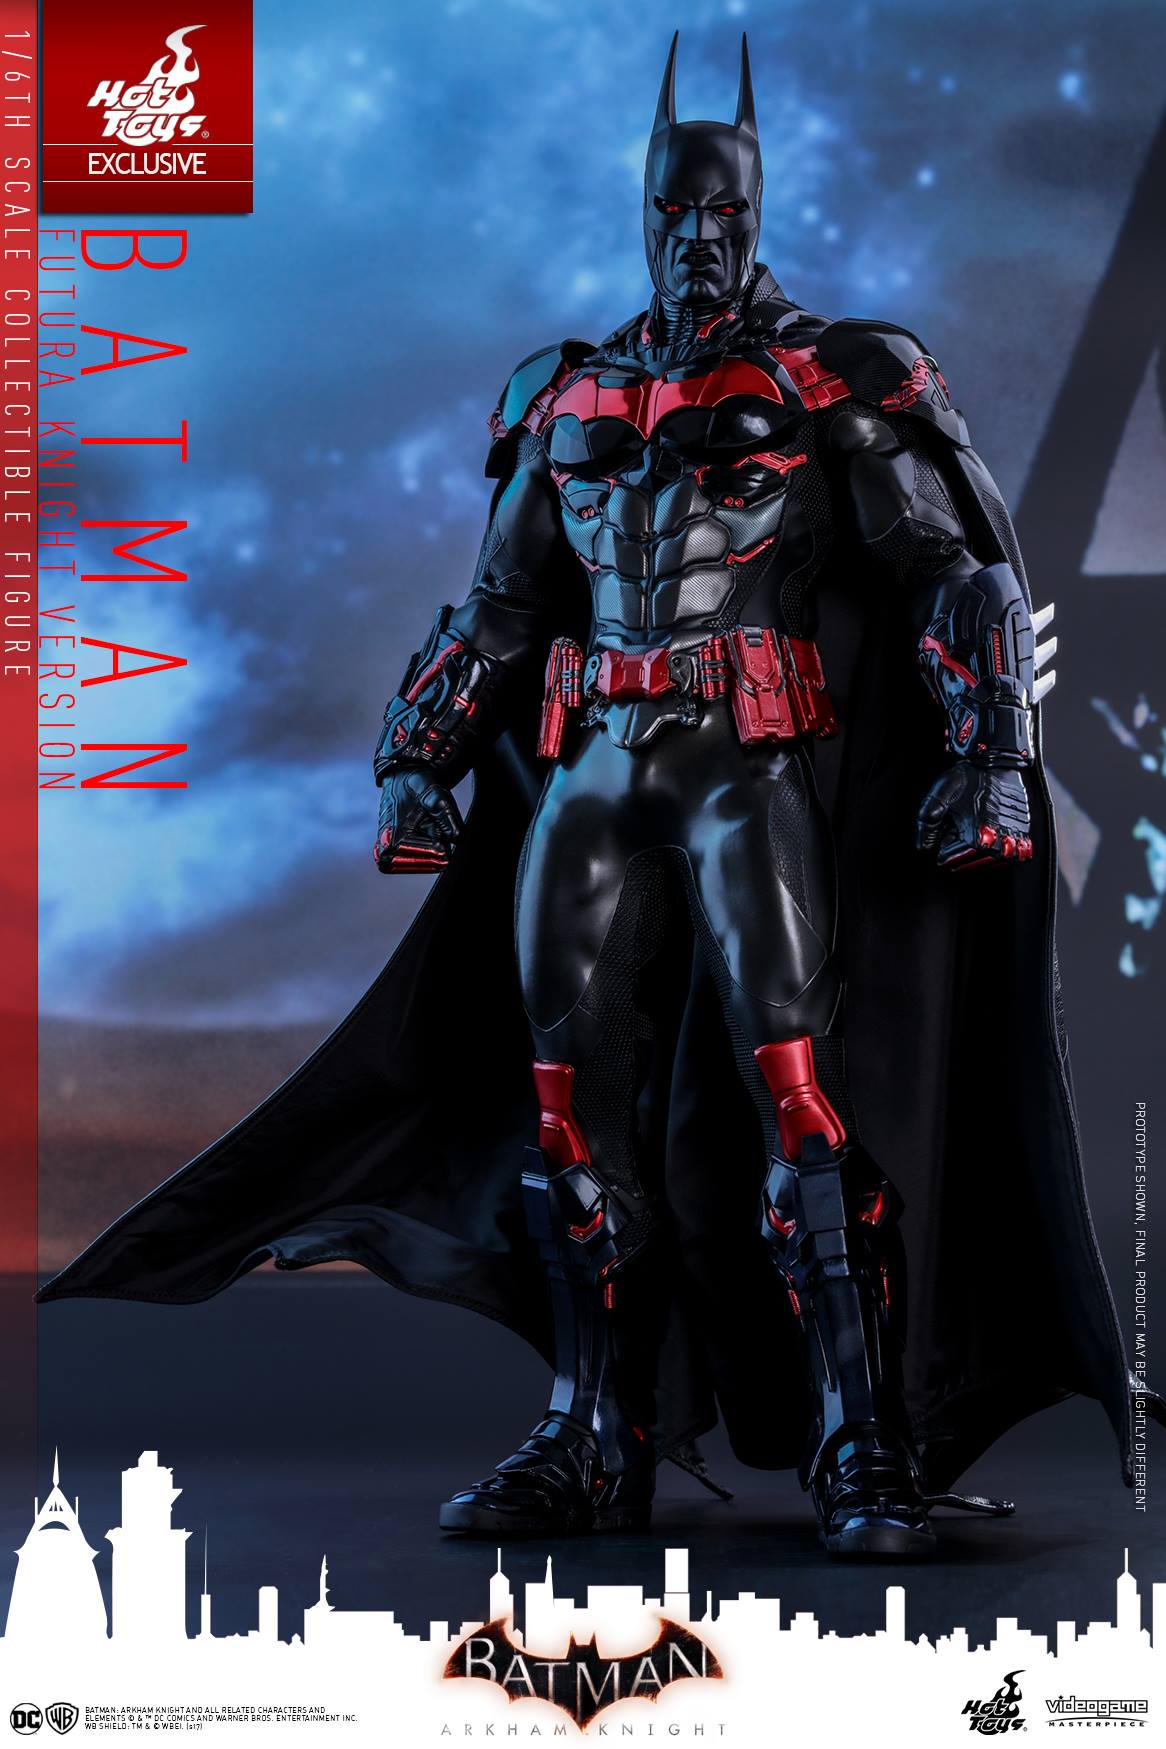 Hot Toys Reveals Their Incredible BATMAN BEYOND Action Figure From